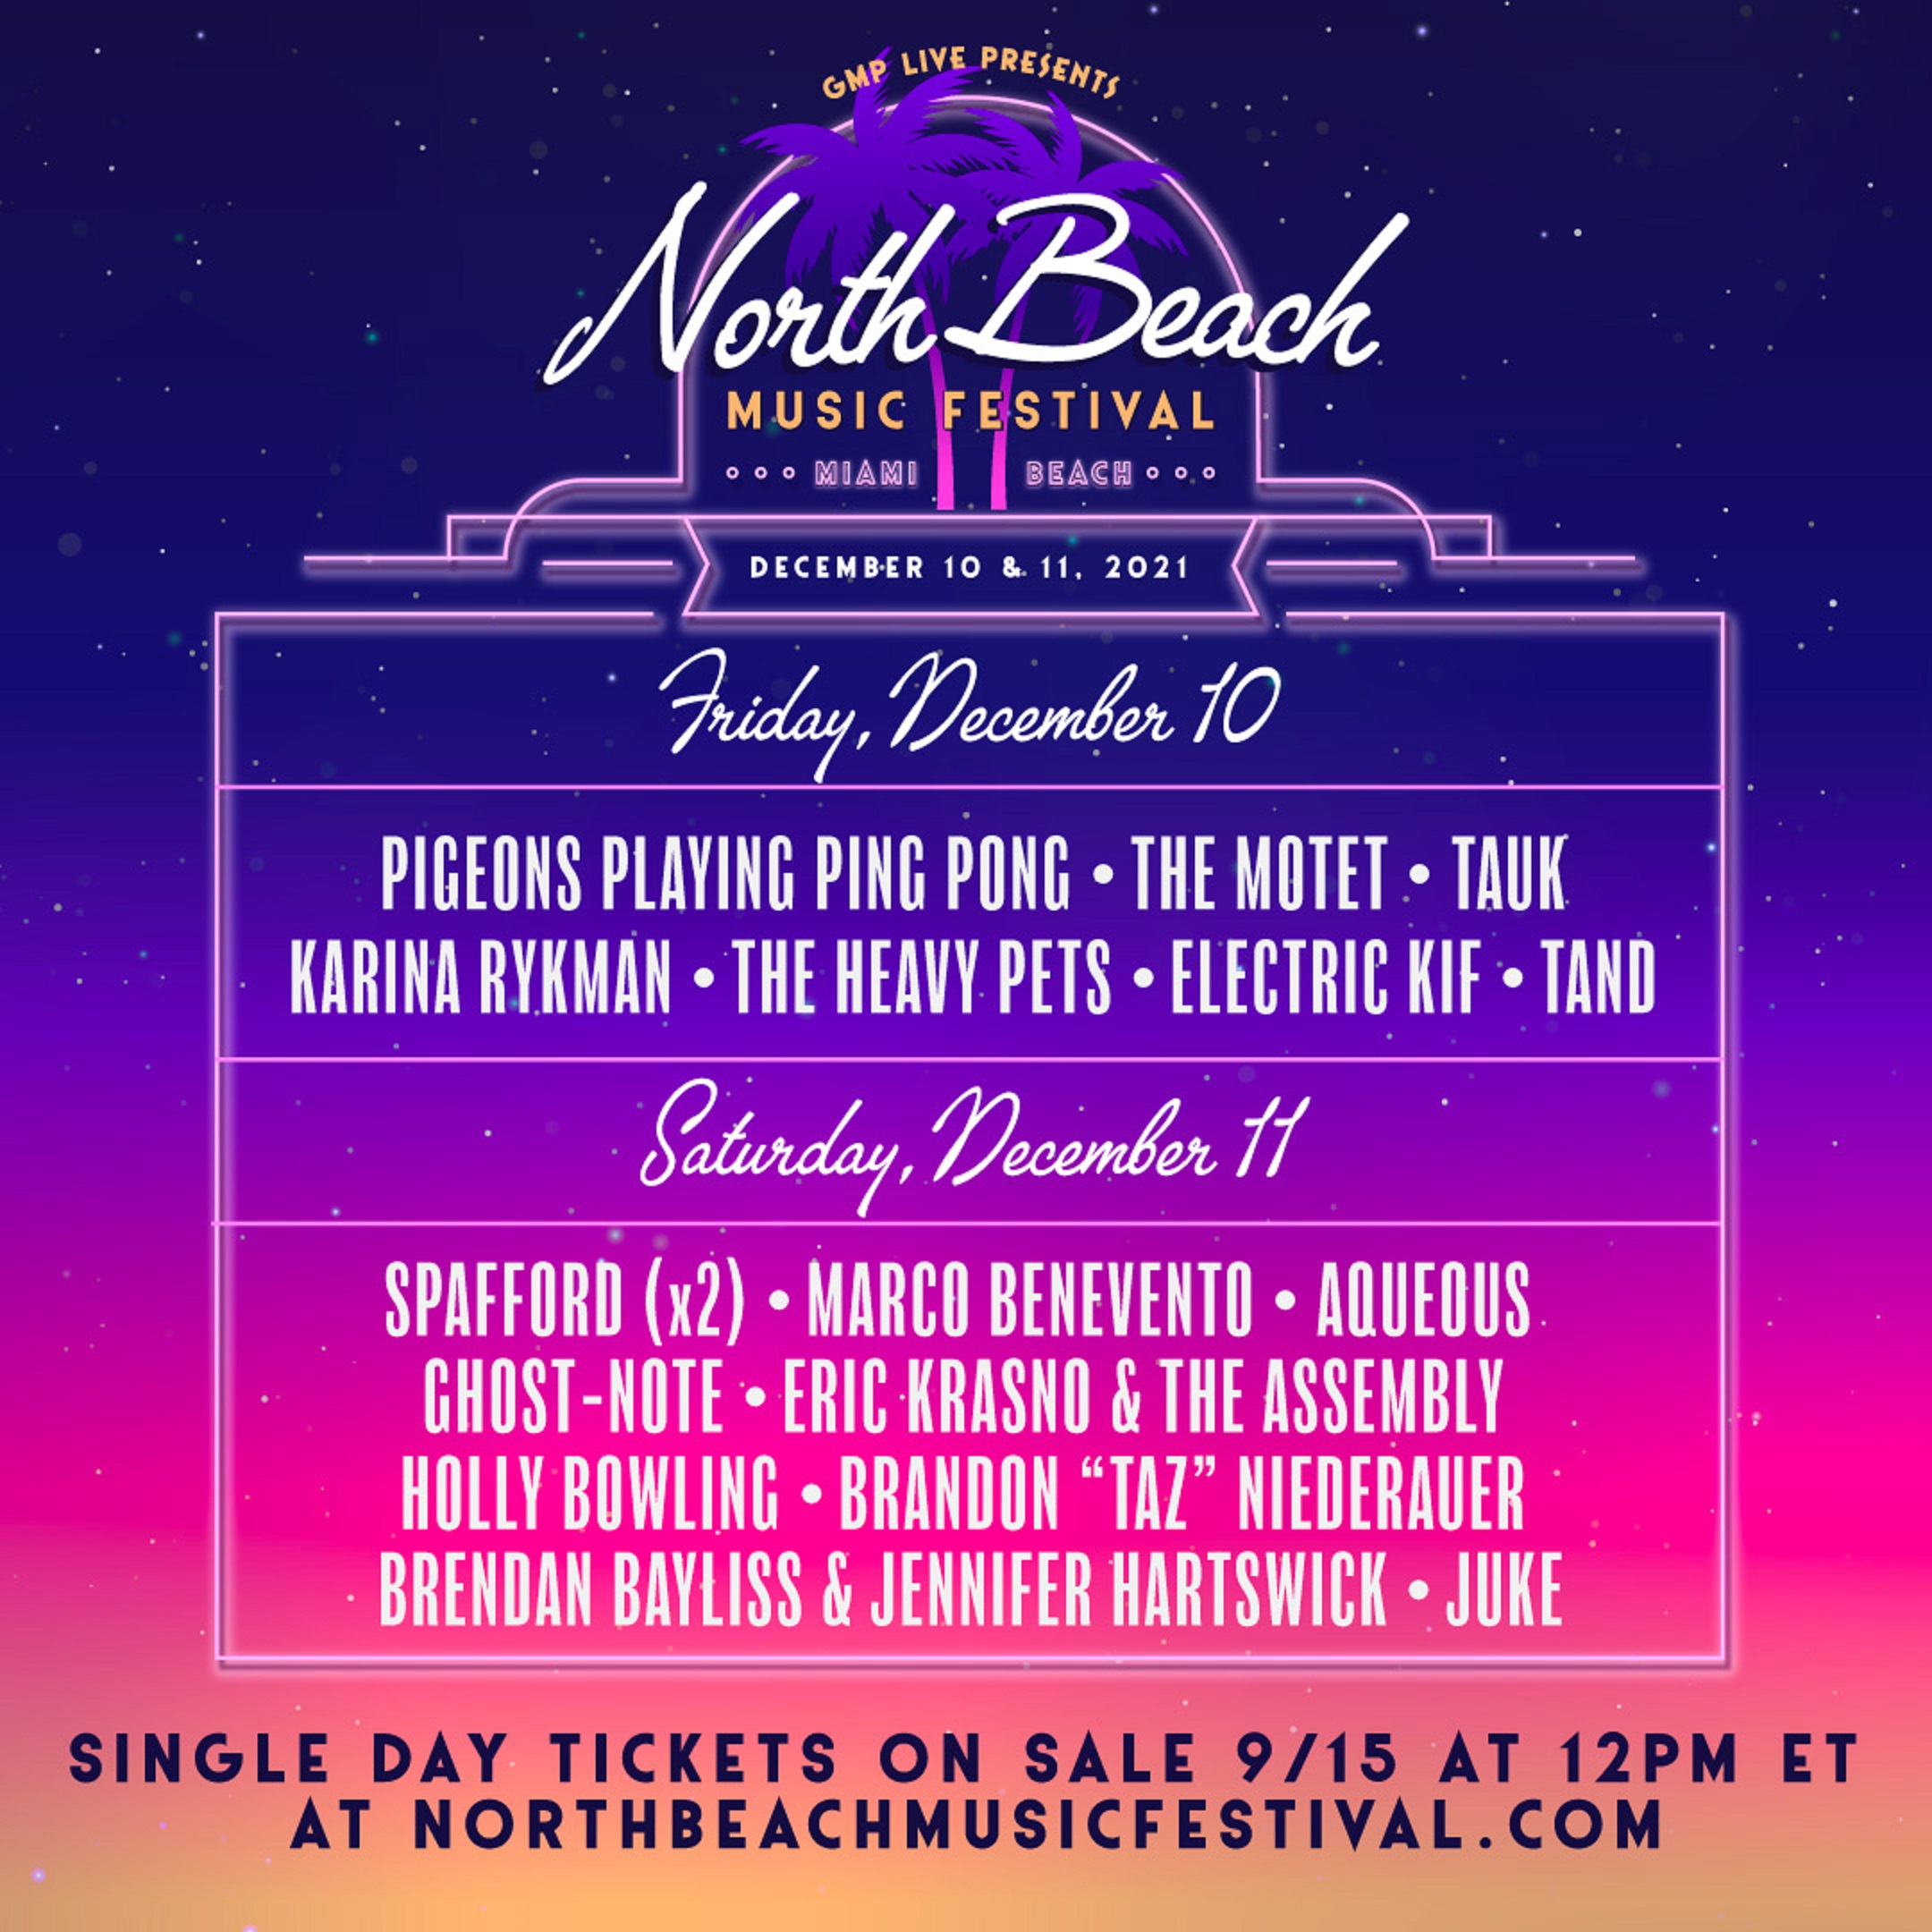 North Beach Music Festival Shares Daily Lineup & Releases Single Day Tickets